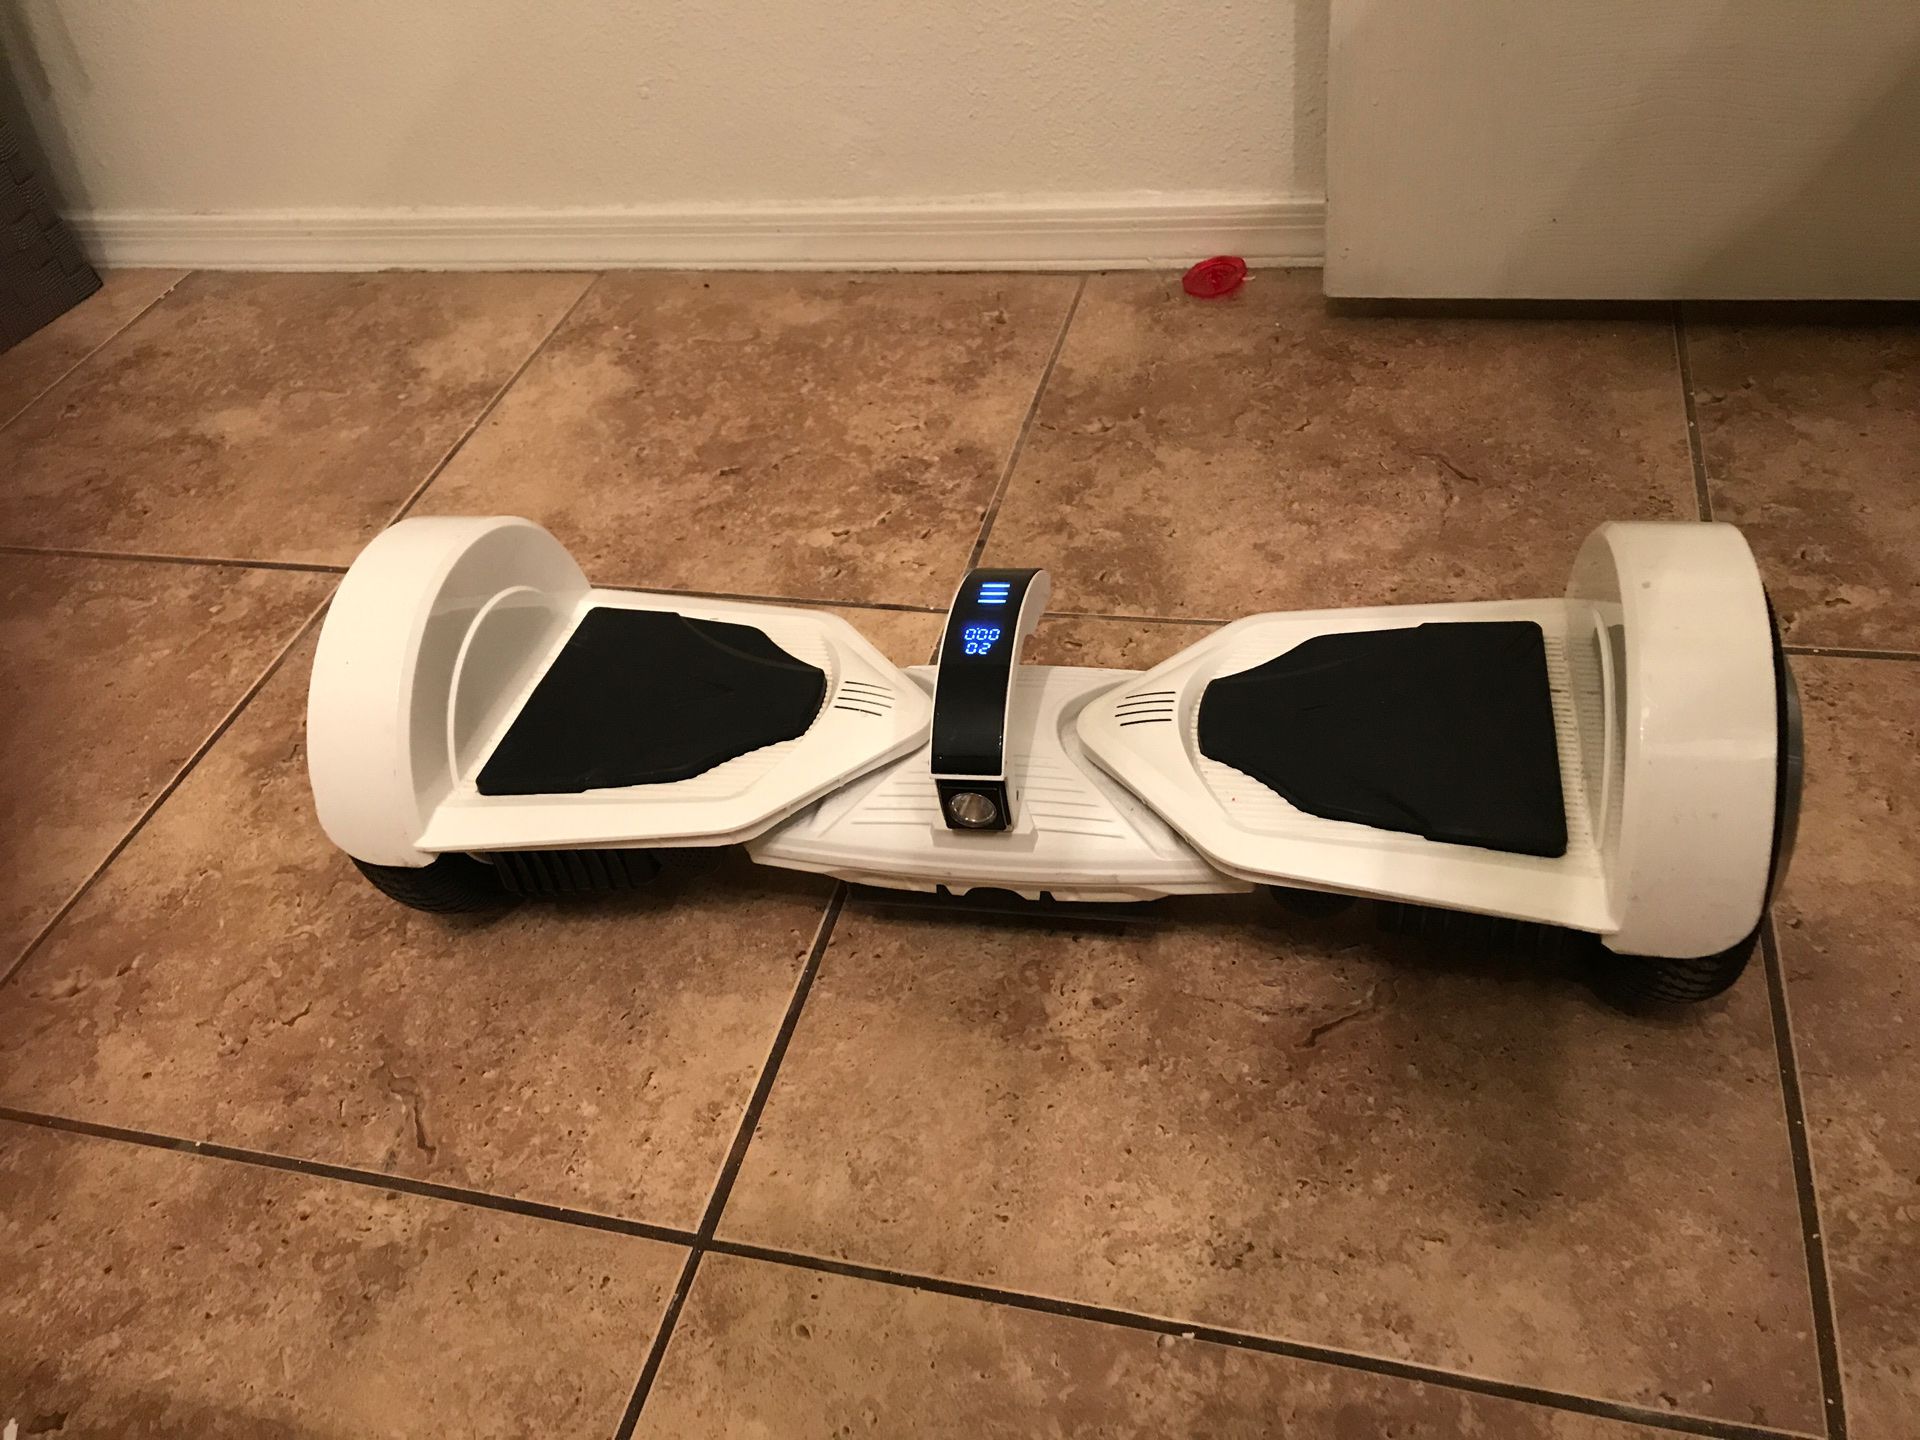 Levita8ion Hoverboard 15 mph max - app to control speed settings